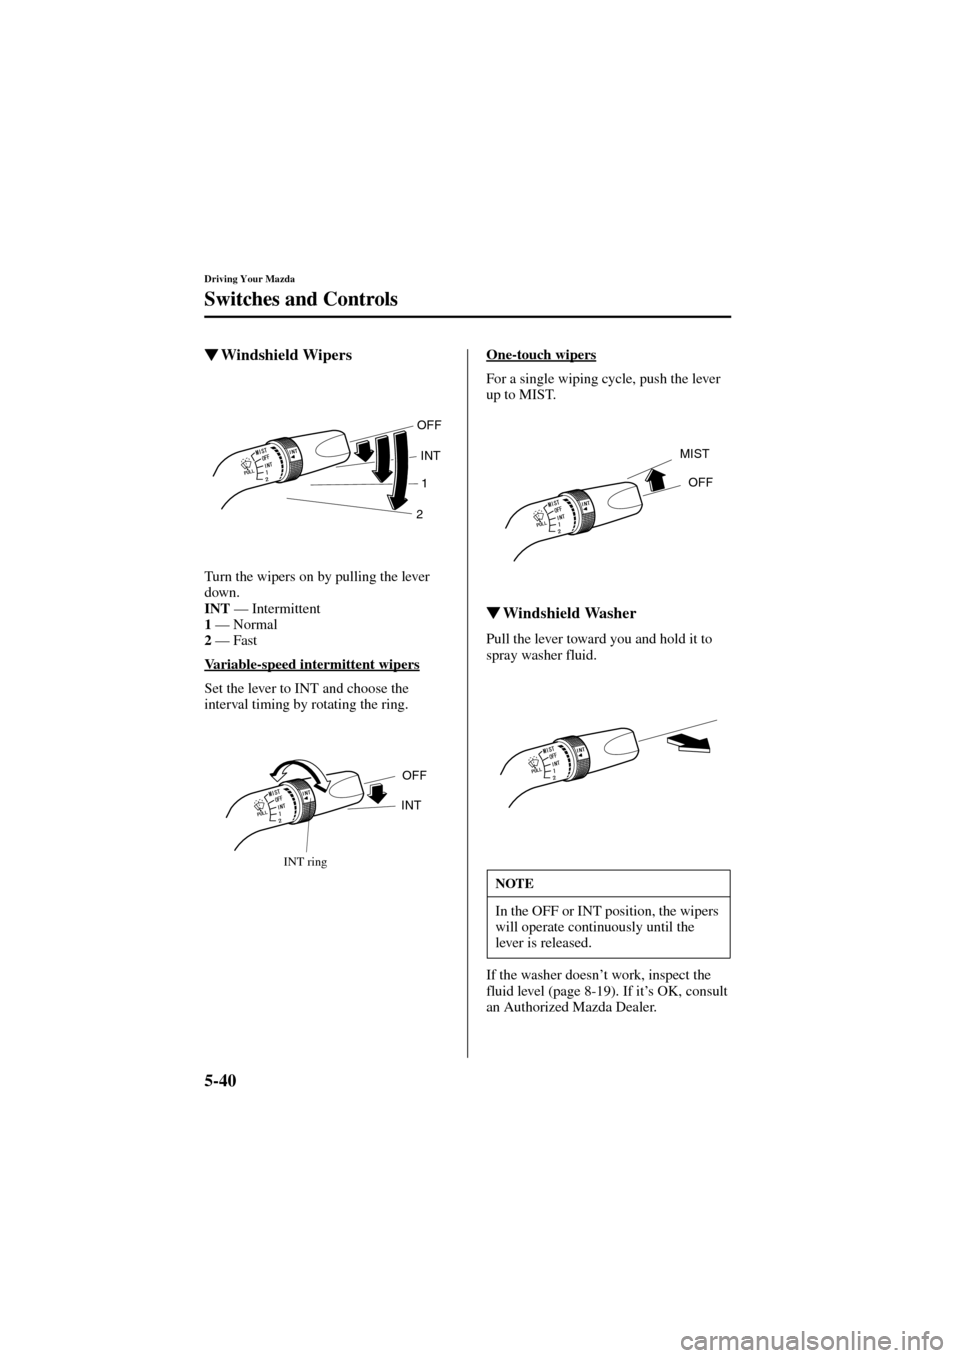 MAZDA MODEL 6 2004  Owners Manual (in English) 5-40
Driving Your Mazda
Switches and Controls
Form No. 8R29-EA-02I
Windshield Wipers
Turn the wipers on by pulling the lever 
down.
INT
 — Intermittent
1
 — Normal
2
 — Fast
Variable-speed inte